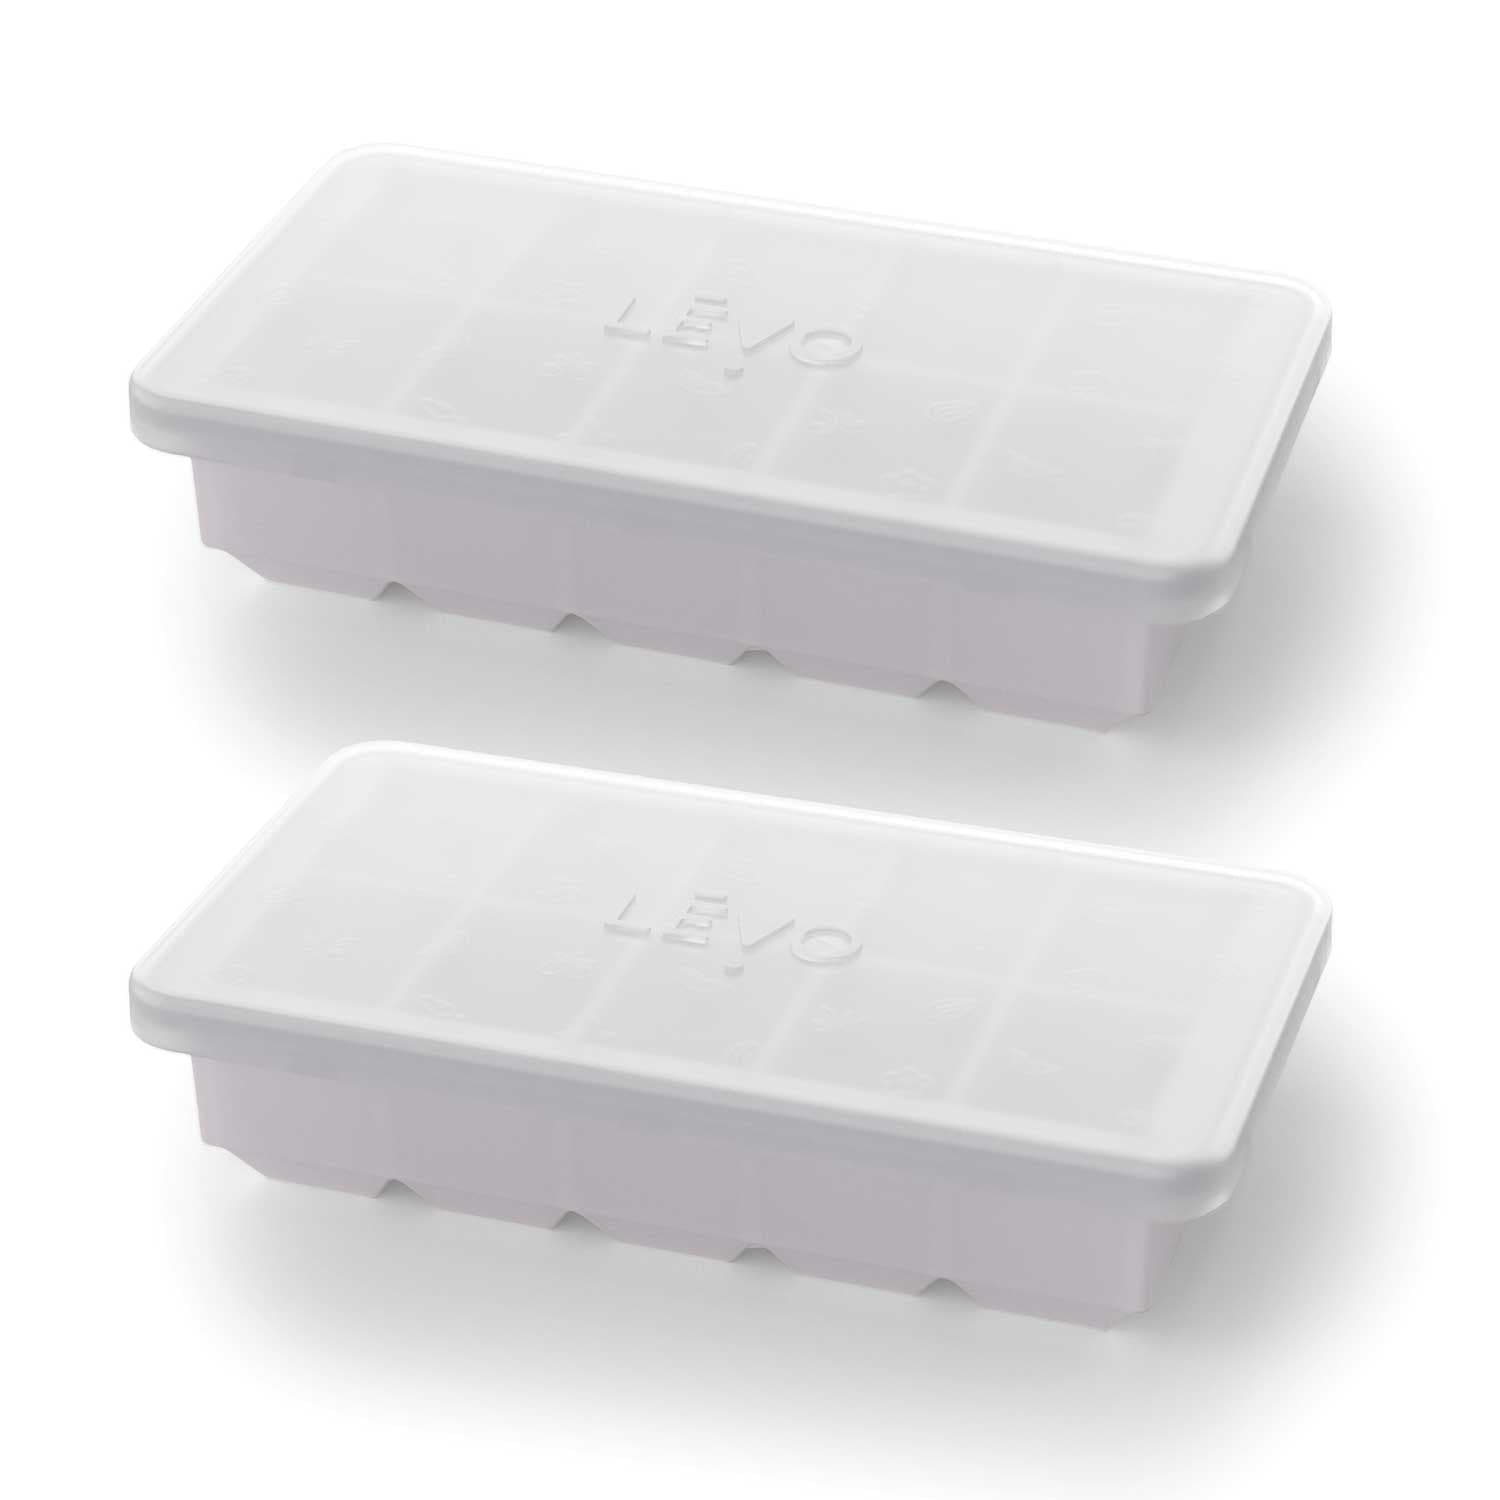 2 LĒVO Herb Block Trays with lid in Grey